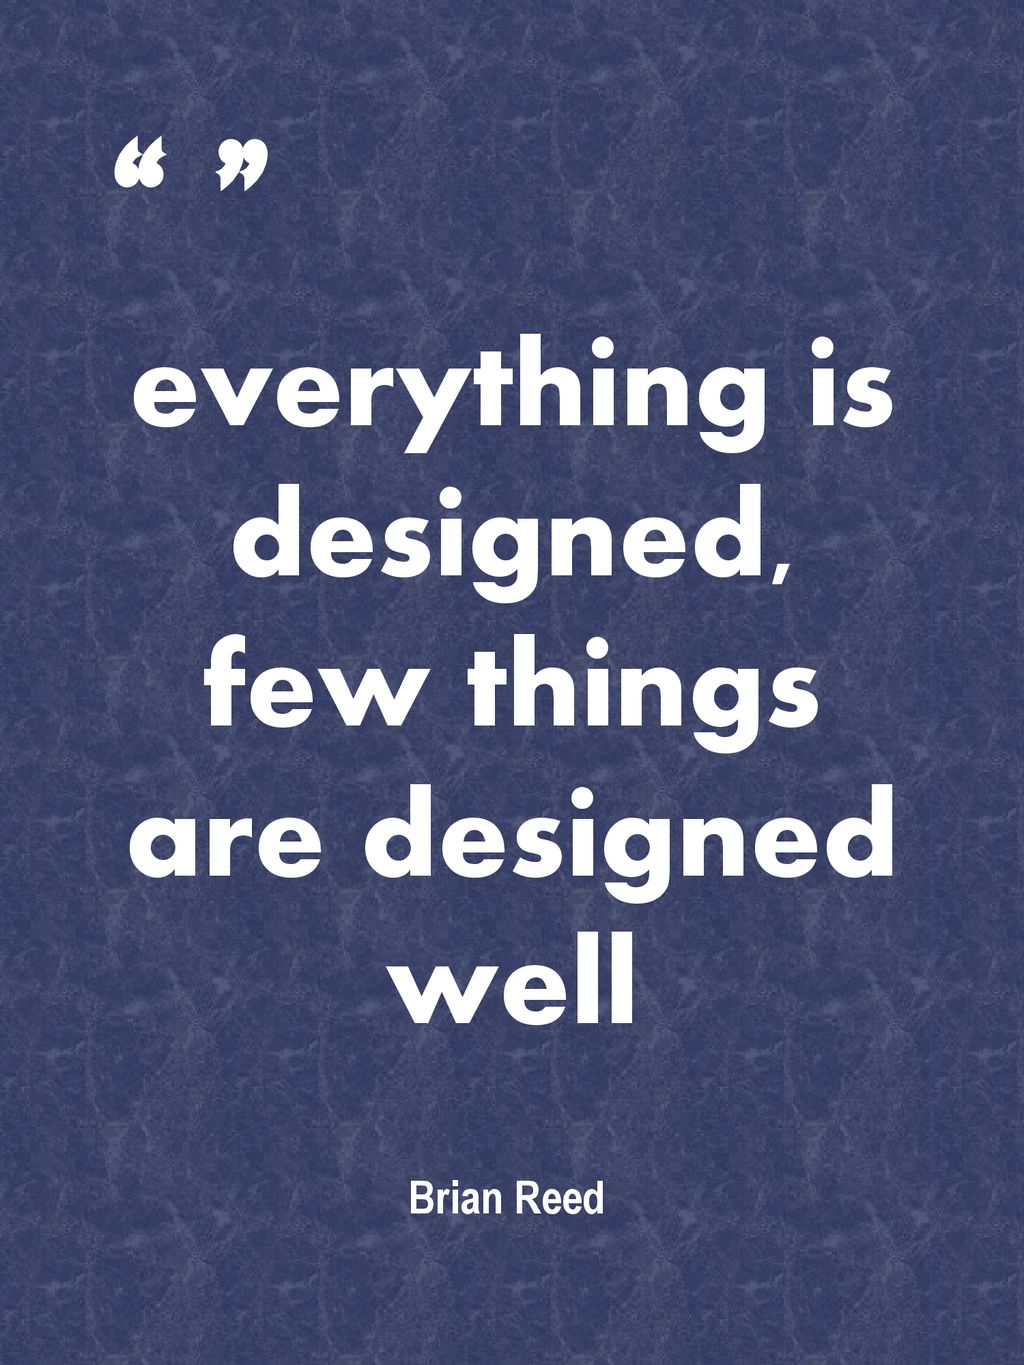 Everything is designed, few things are designed well